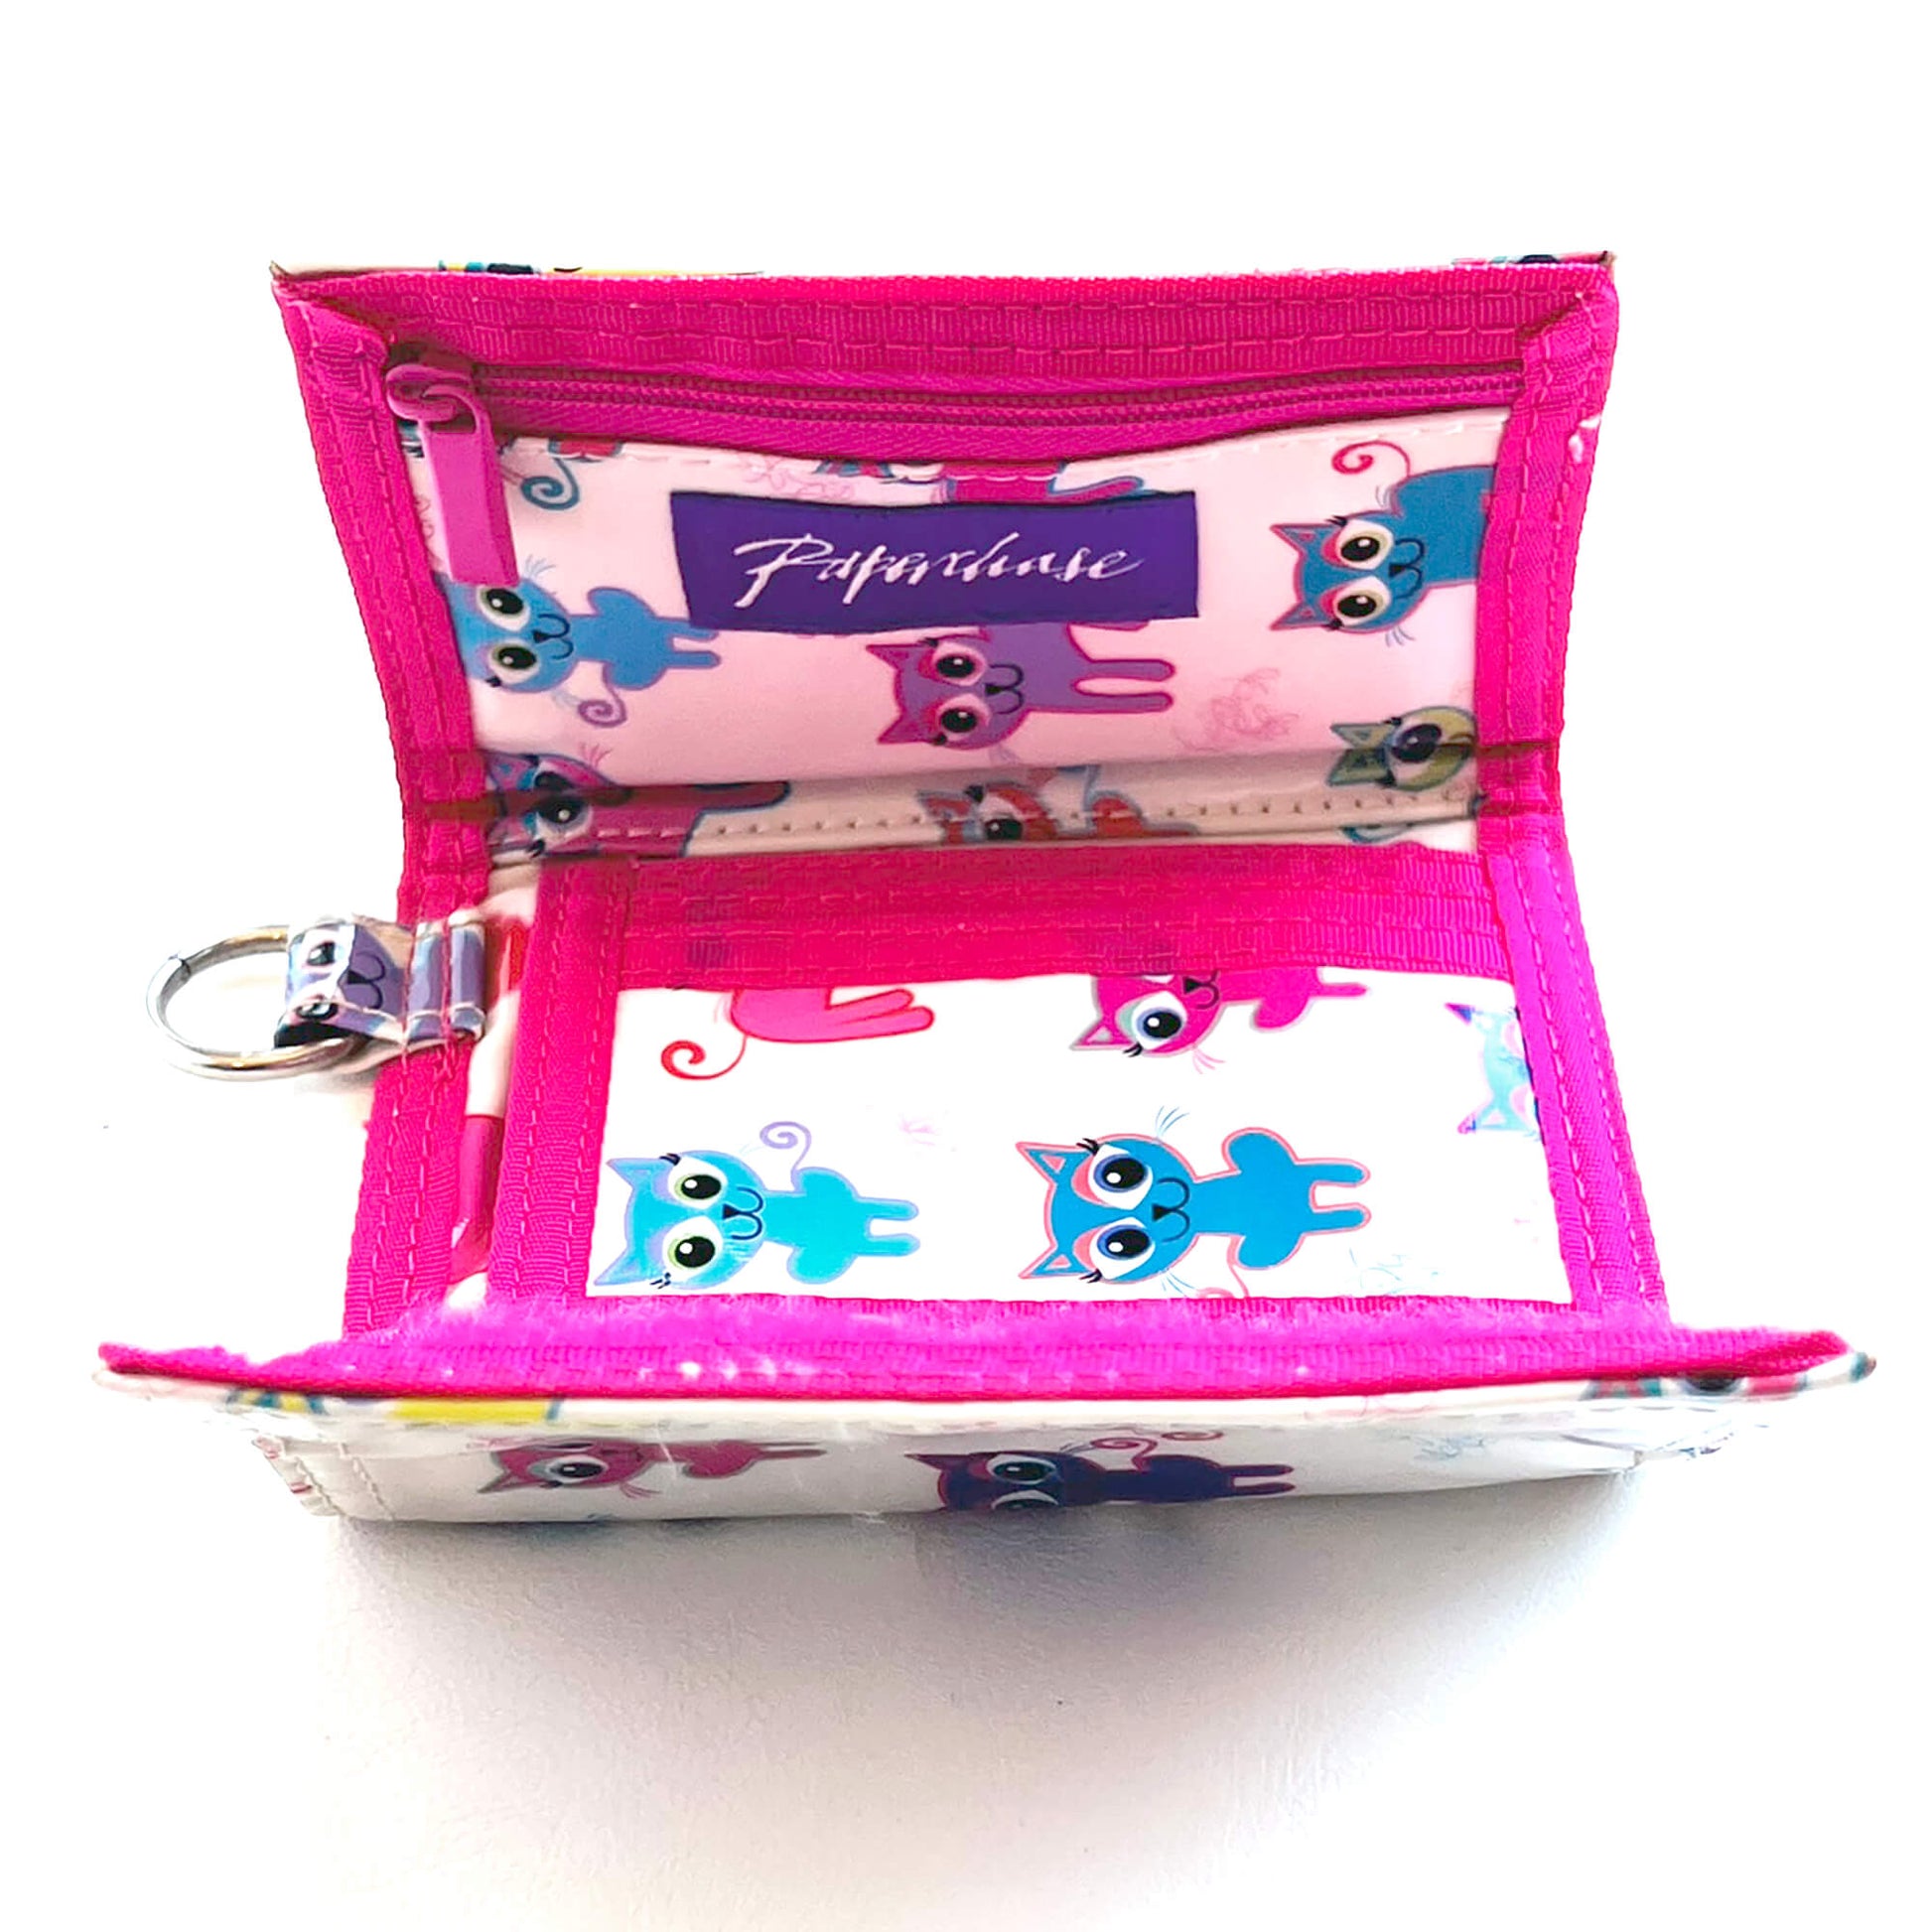 Paperchase-Kitty-Cat-Wallet_-Made-in-England-Tri-Fold_-logo-view_-shop-eBargainsAndDeals